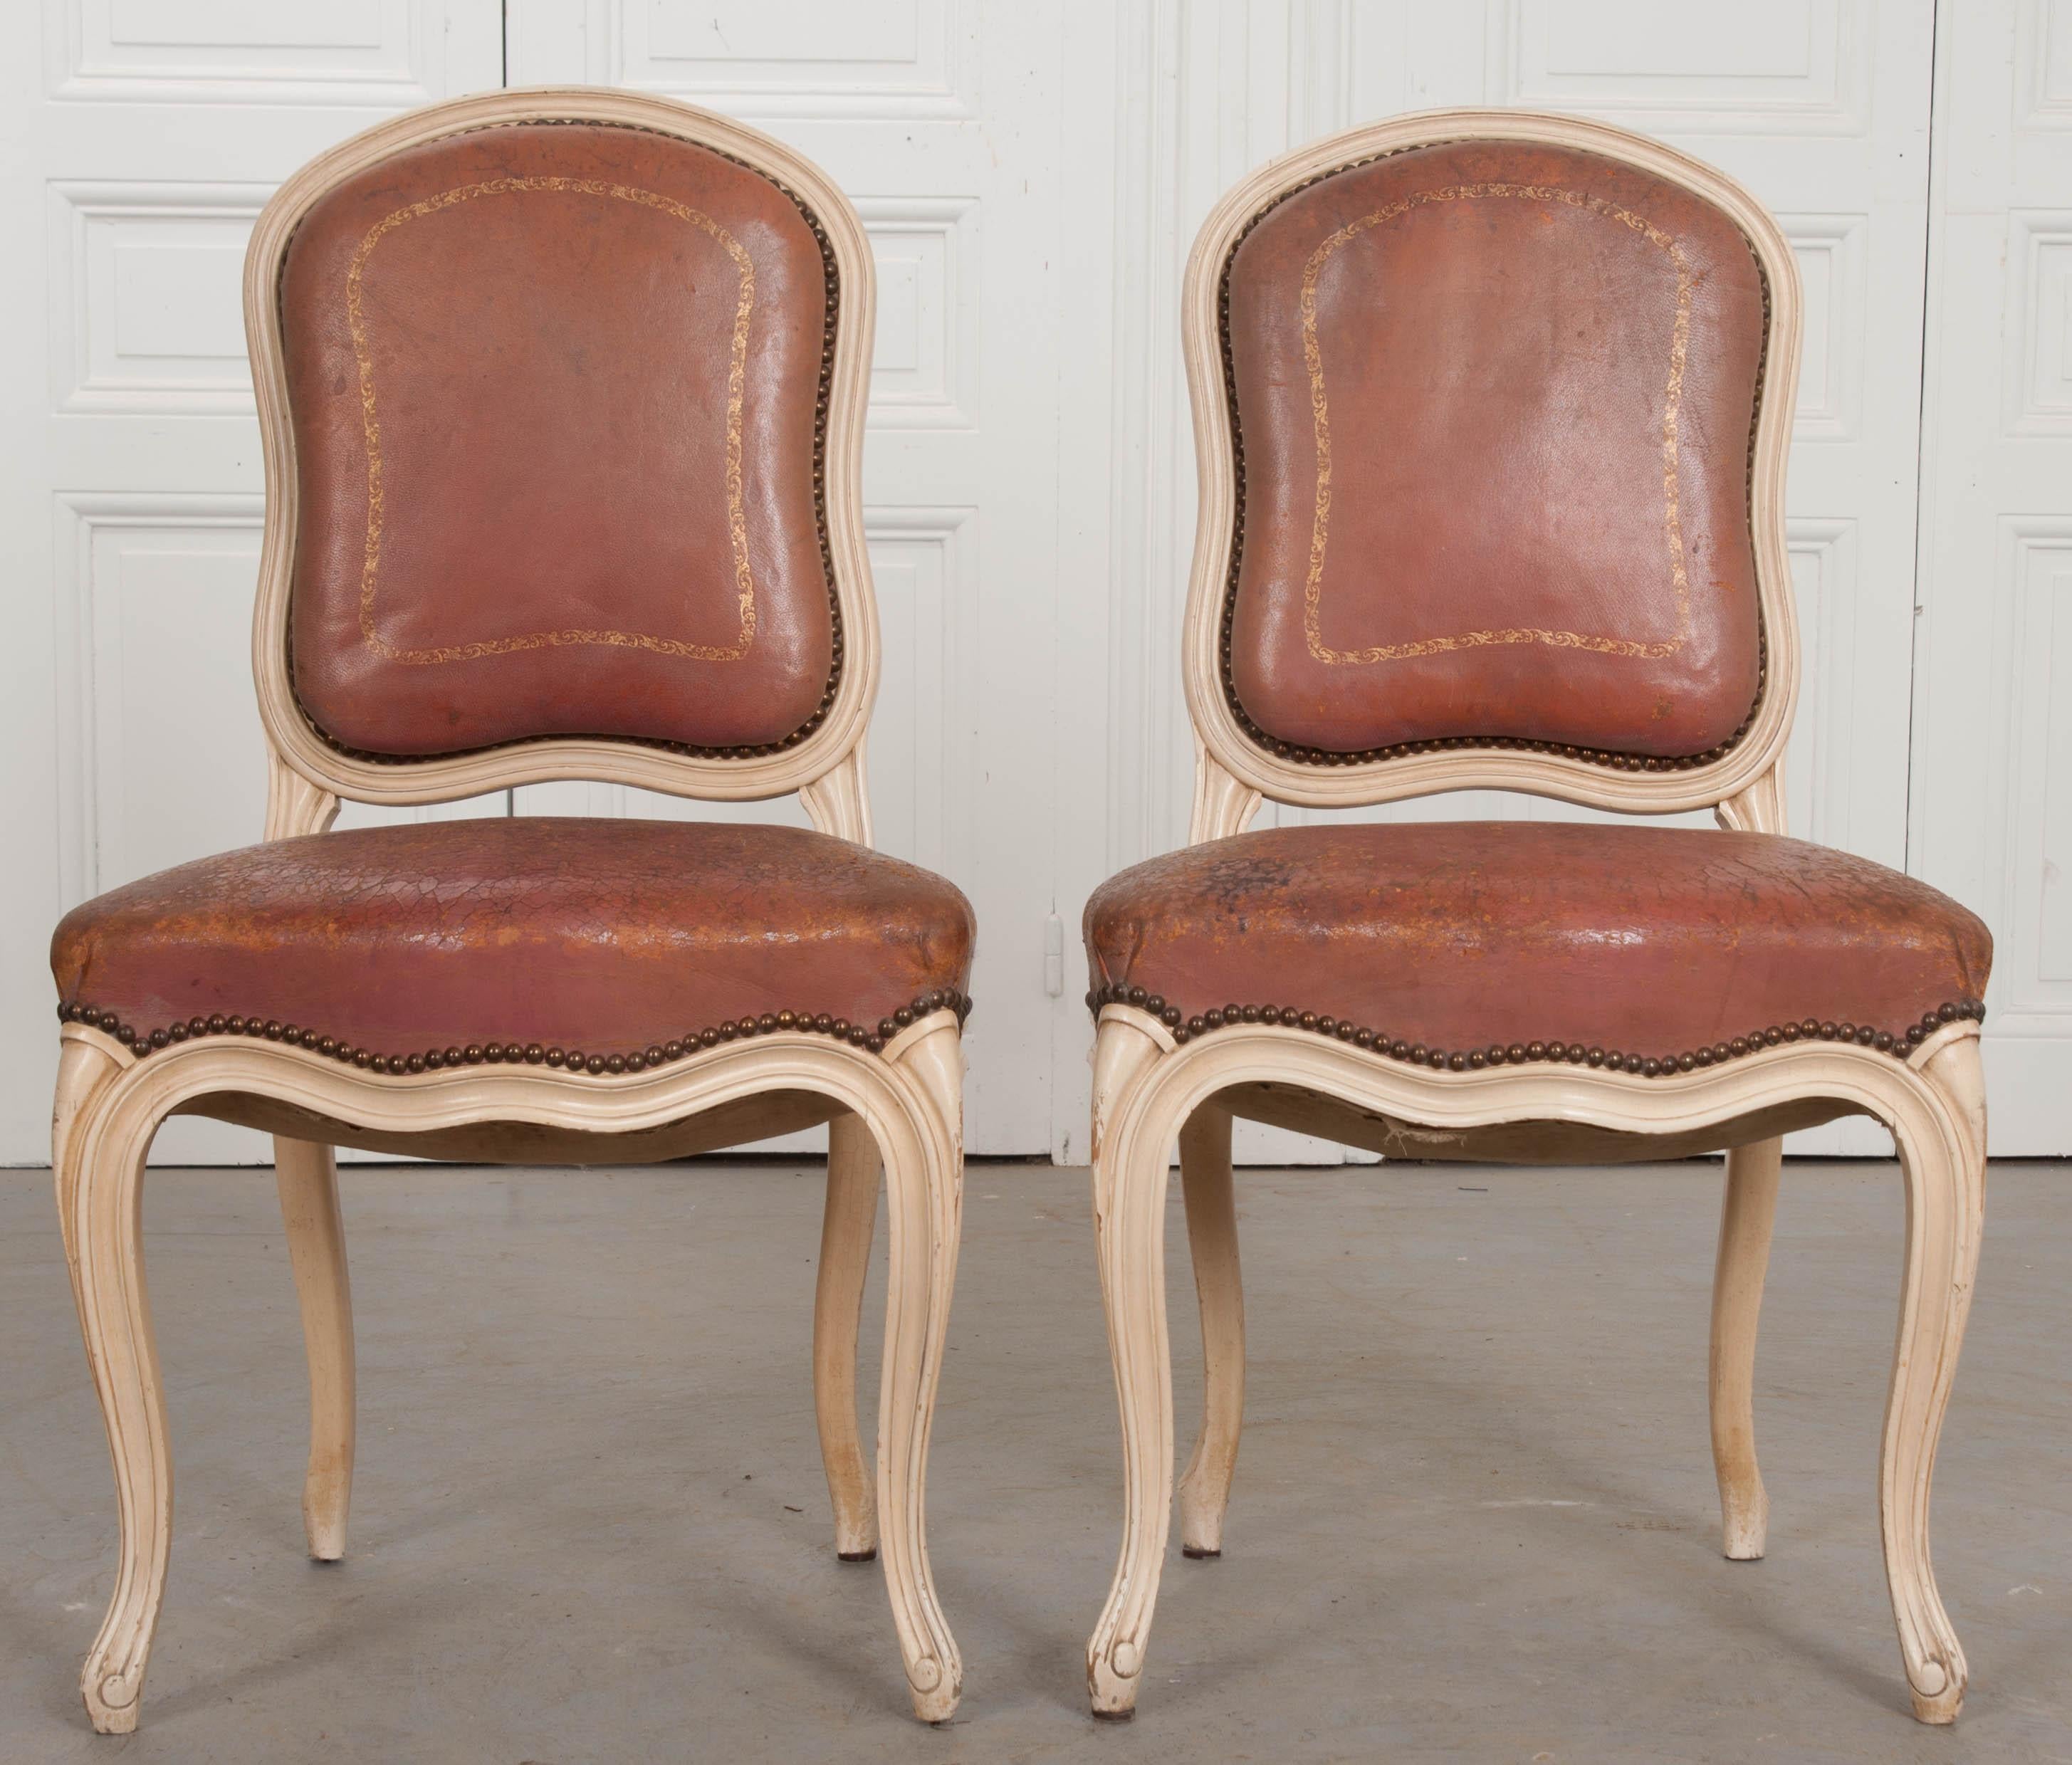 A stunning pair of Louis XV style dining chairs, upholstered in a heavily-worn antique leather. The shapely pair have a frame that is painted in a creamy ivory color that has patinated over time, acquiring an amazing antique finish. They are